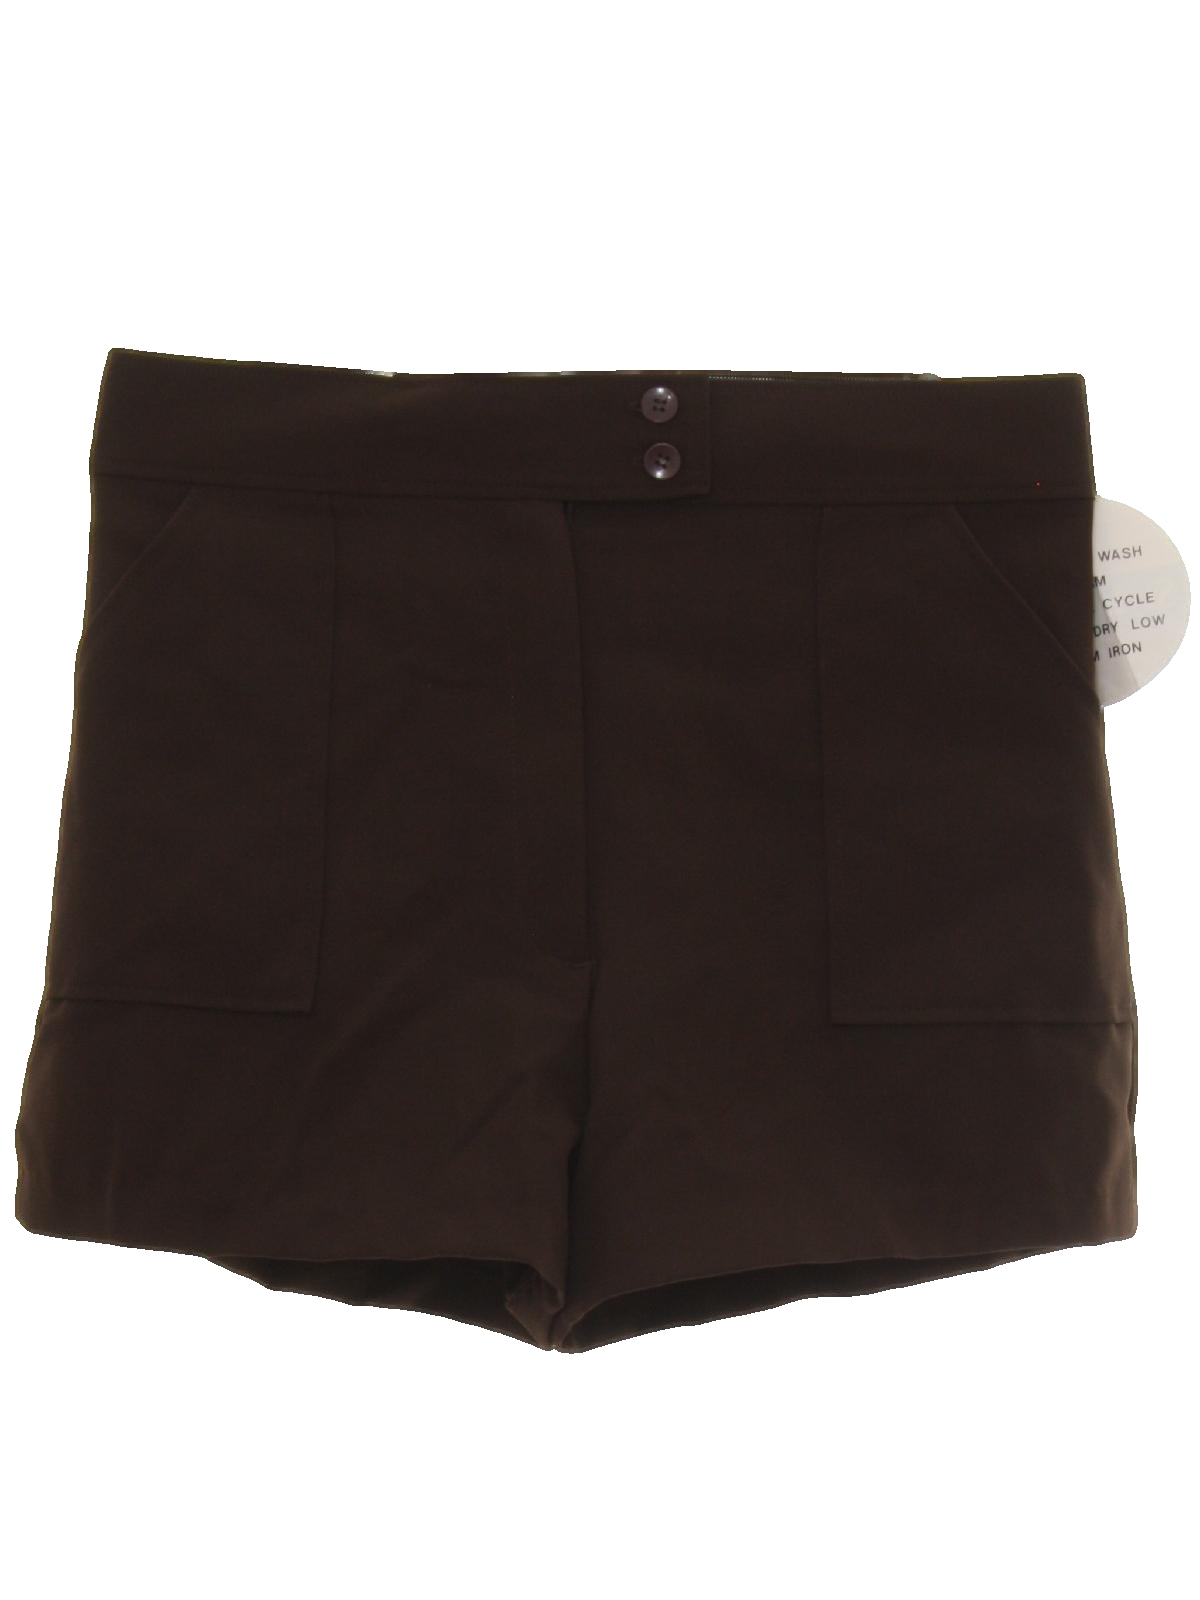 Retro Eighties Shorts: 80s -Kmart- Womens dark brown background polyester  shorts with two button and zippered front closure, front slash pockets and  wide waistband.